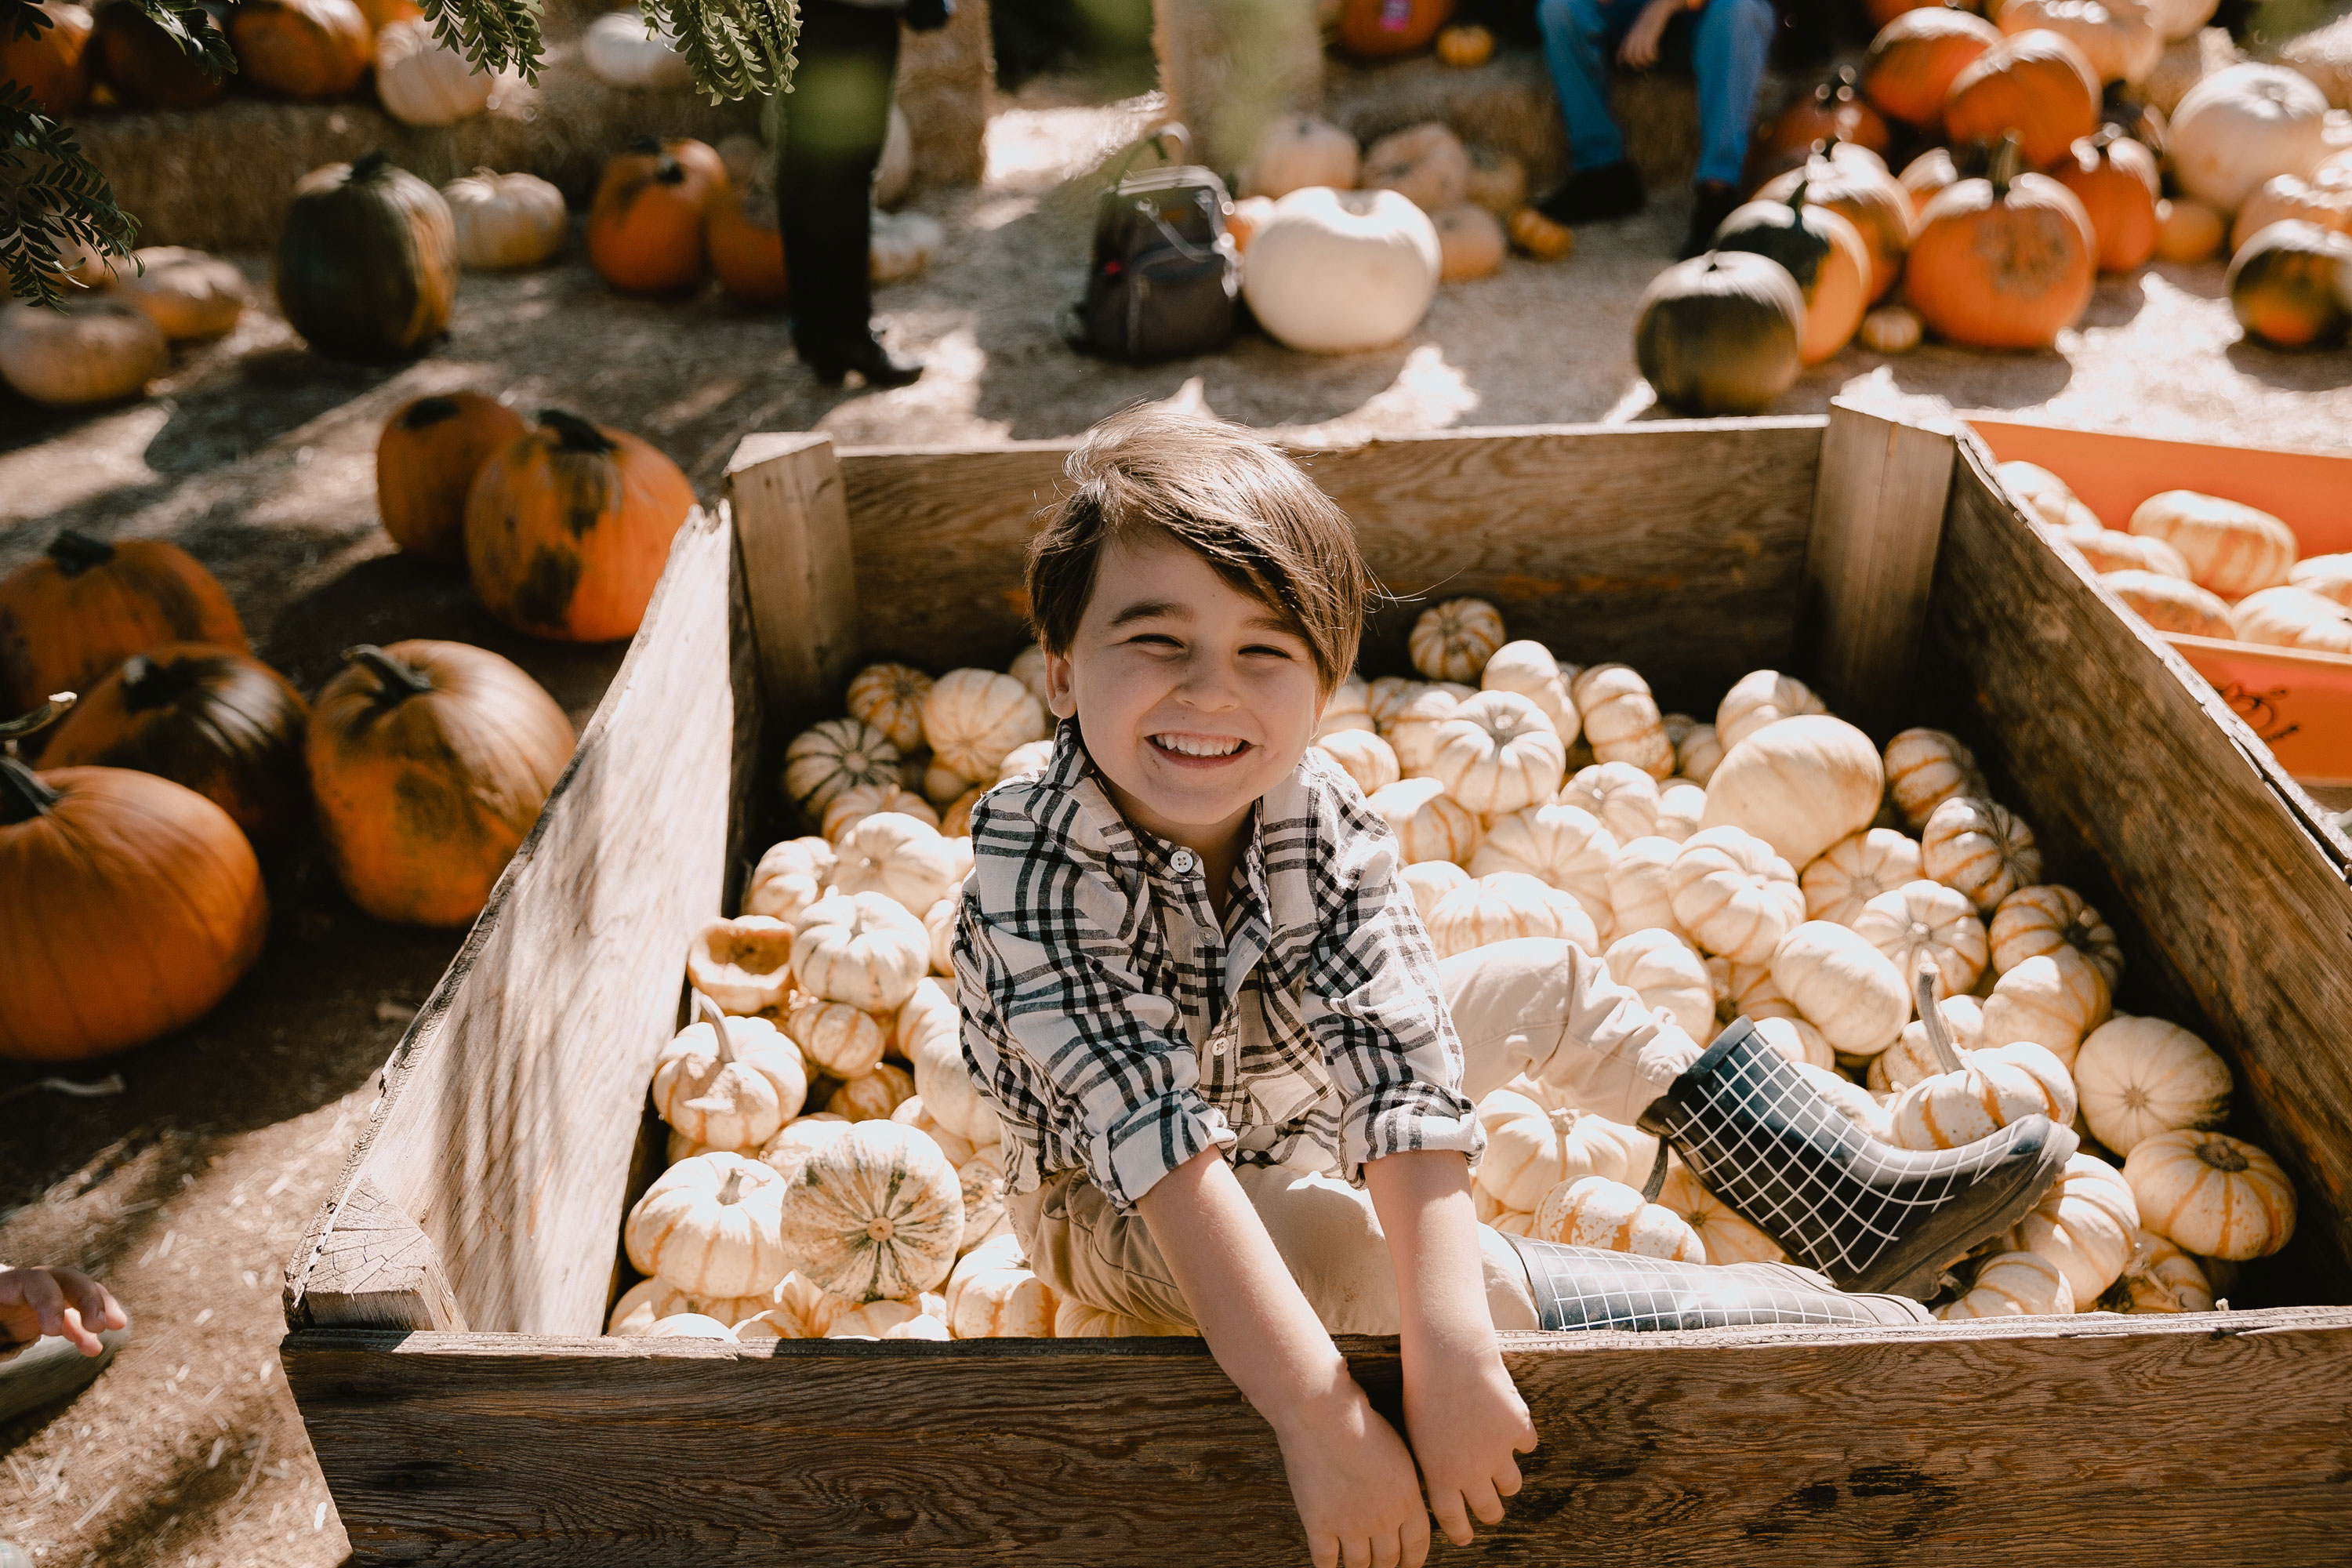 cutest pumpkin in the patch (bin) in his black and white check Rylee & Cru shirt from Bohemian Mama. #boma #fall #whitepumpkins #pumpkinpatch